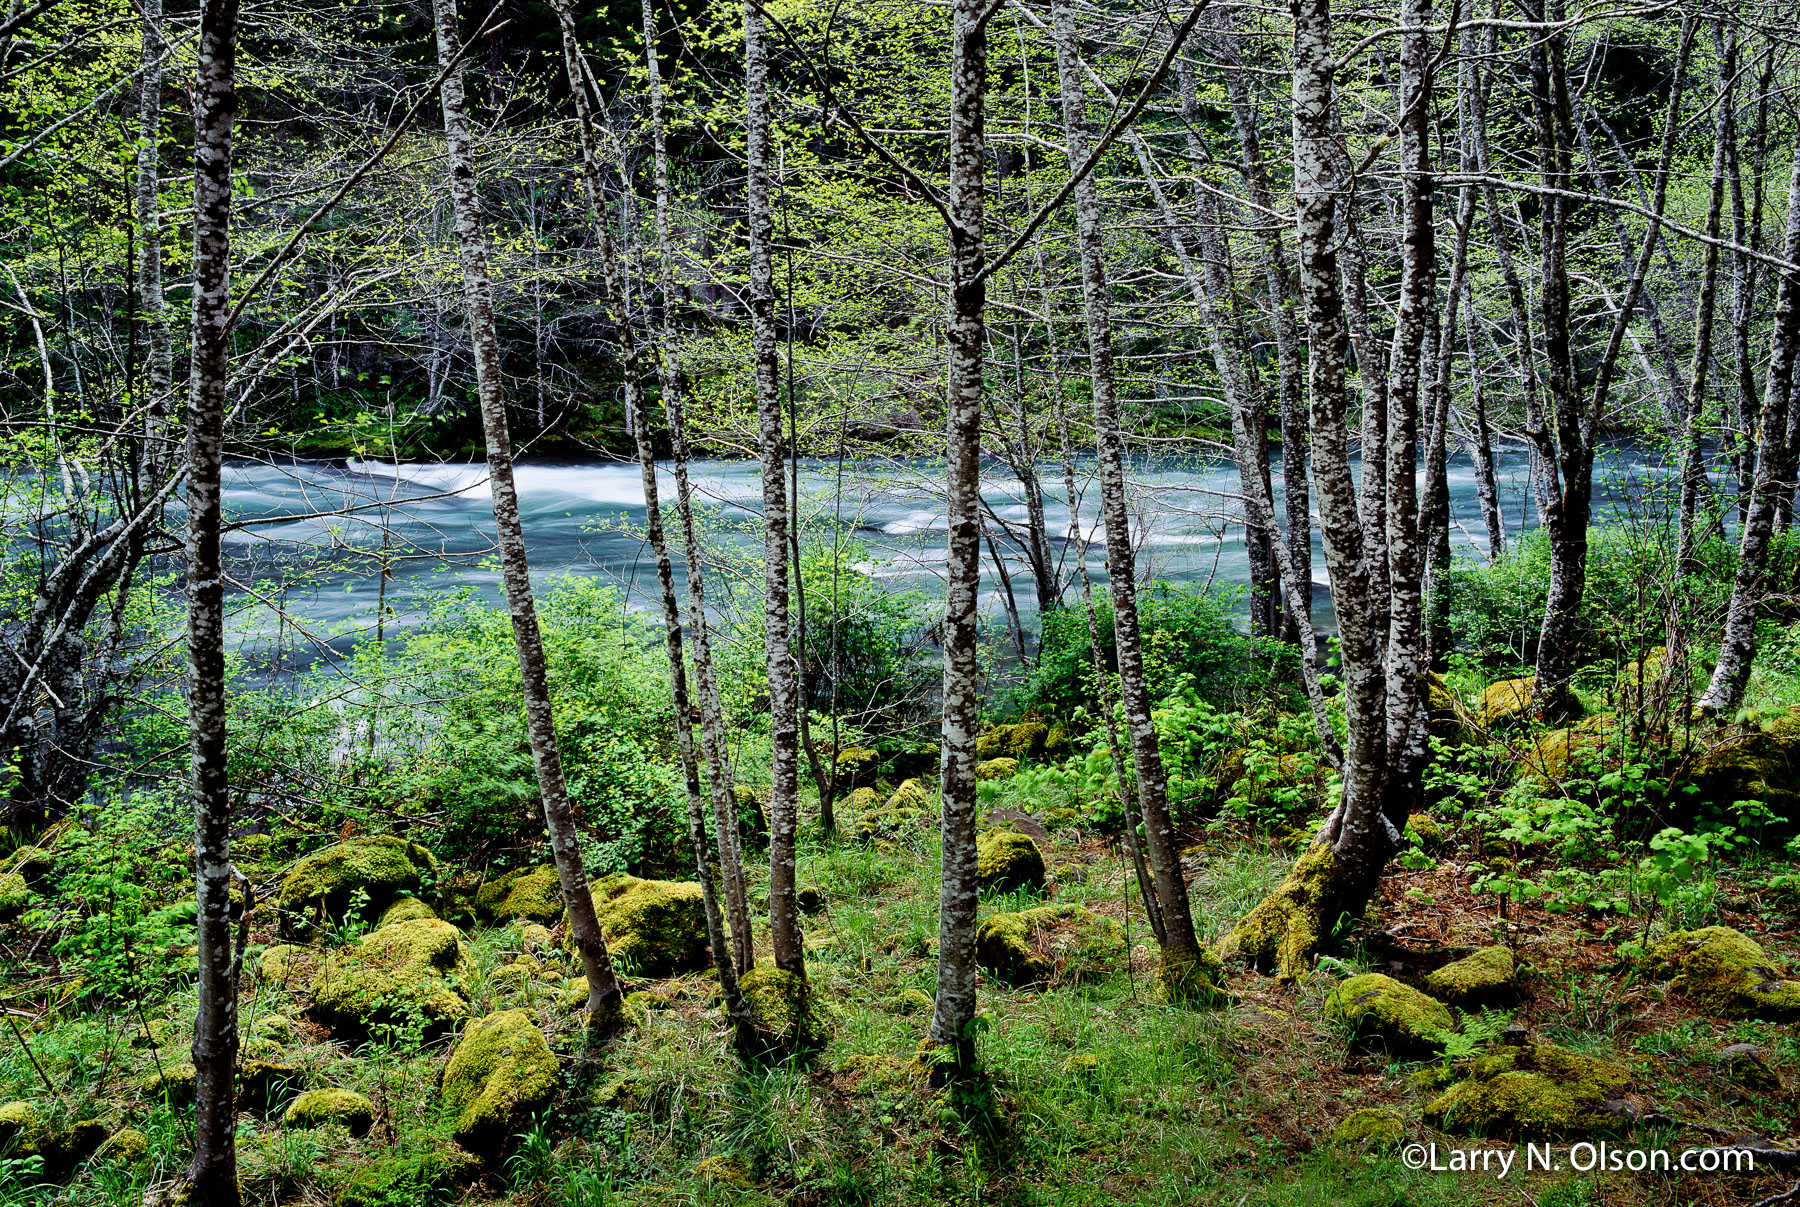 North Umpqua River, OR | Alder budding out in the early spring.